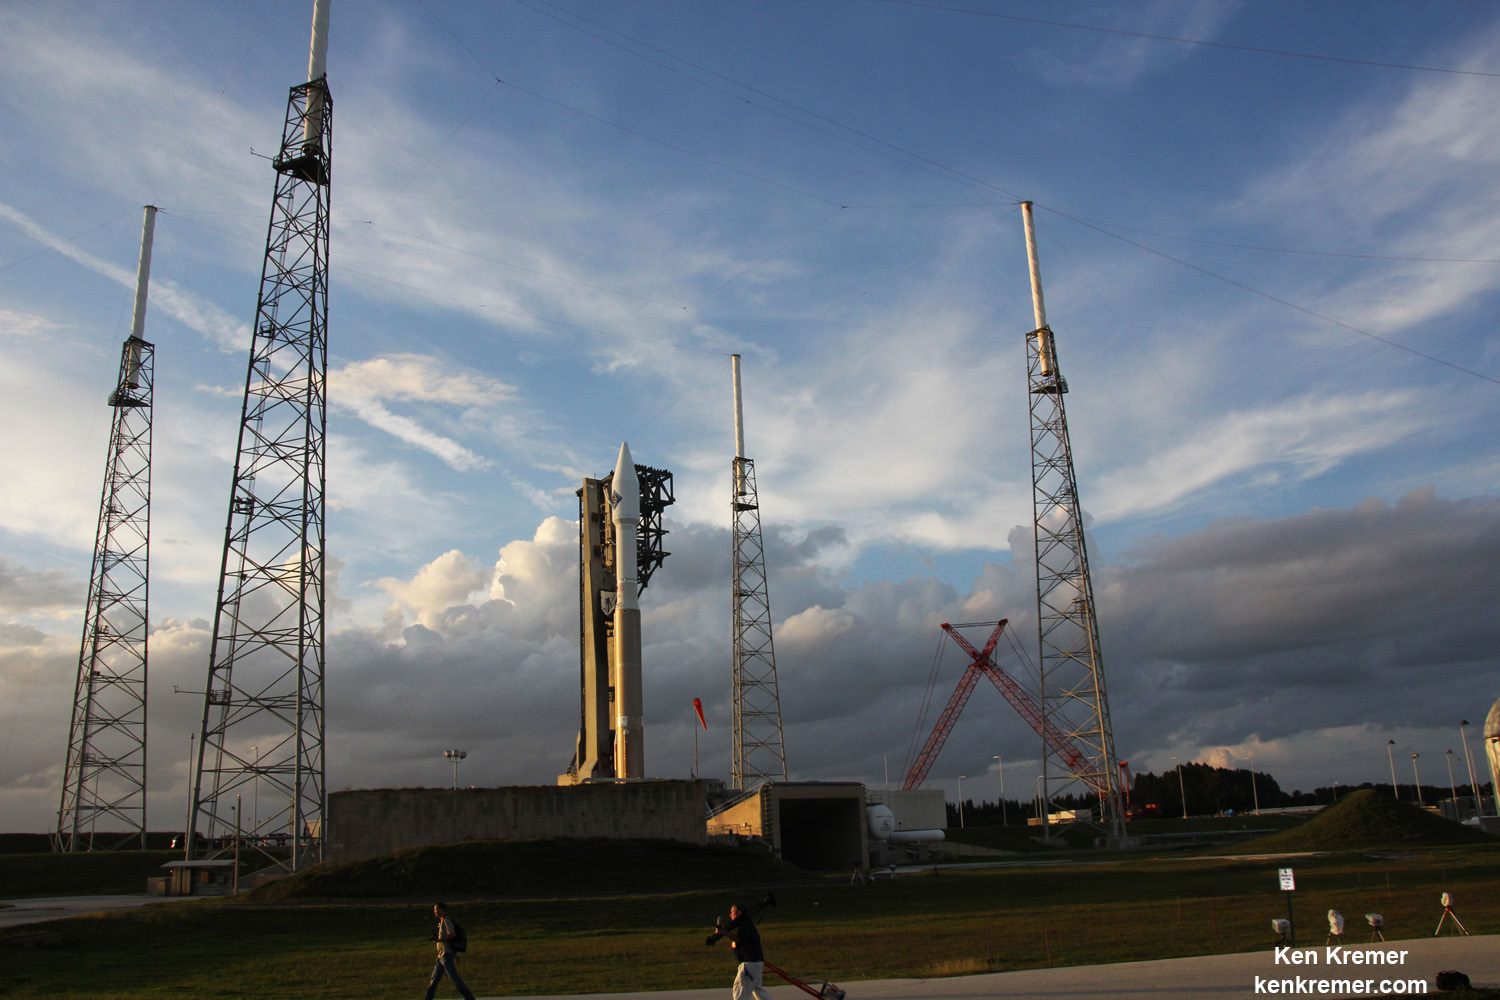 Sunset view of Orbital ATK Cygnus CRS-4 spacecraft at Space Launch Complex 41 poised for blastoff  to ISS on ULA Atlas V on Dec. 3, 2015 from Cape Canaveral Air Force Station, Florida.  Atlas V rocket stands adjacent to new commercial crew access tower for astronaut launching on Boeing Starliner space taxi starting in 2017.  Credit: Ken Kremer/kenkremer.com